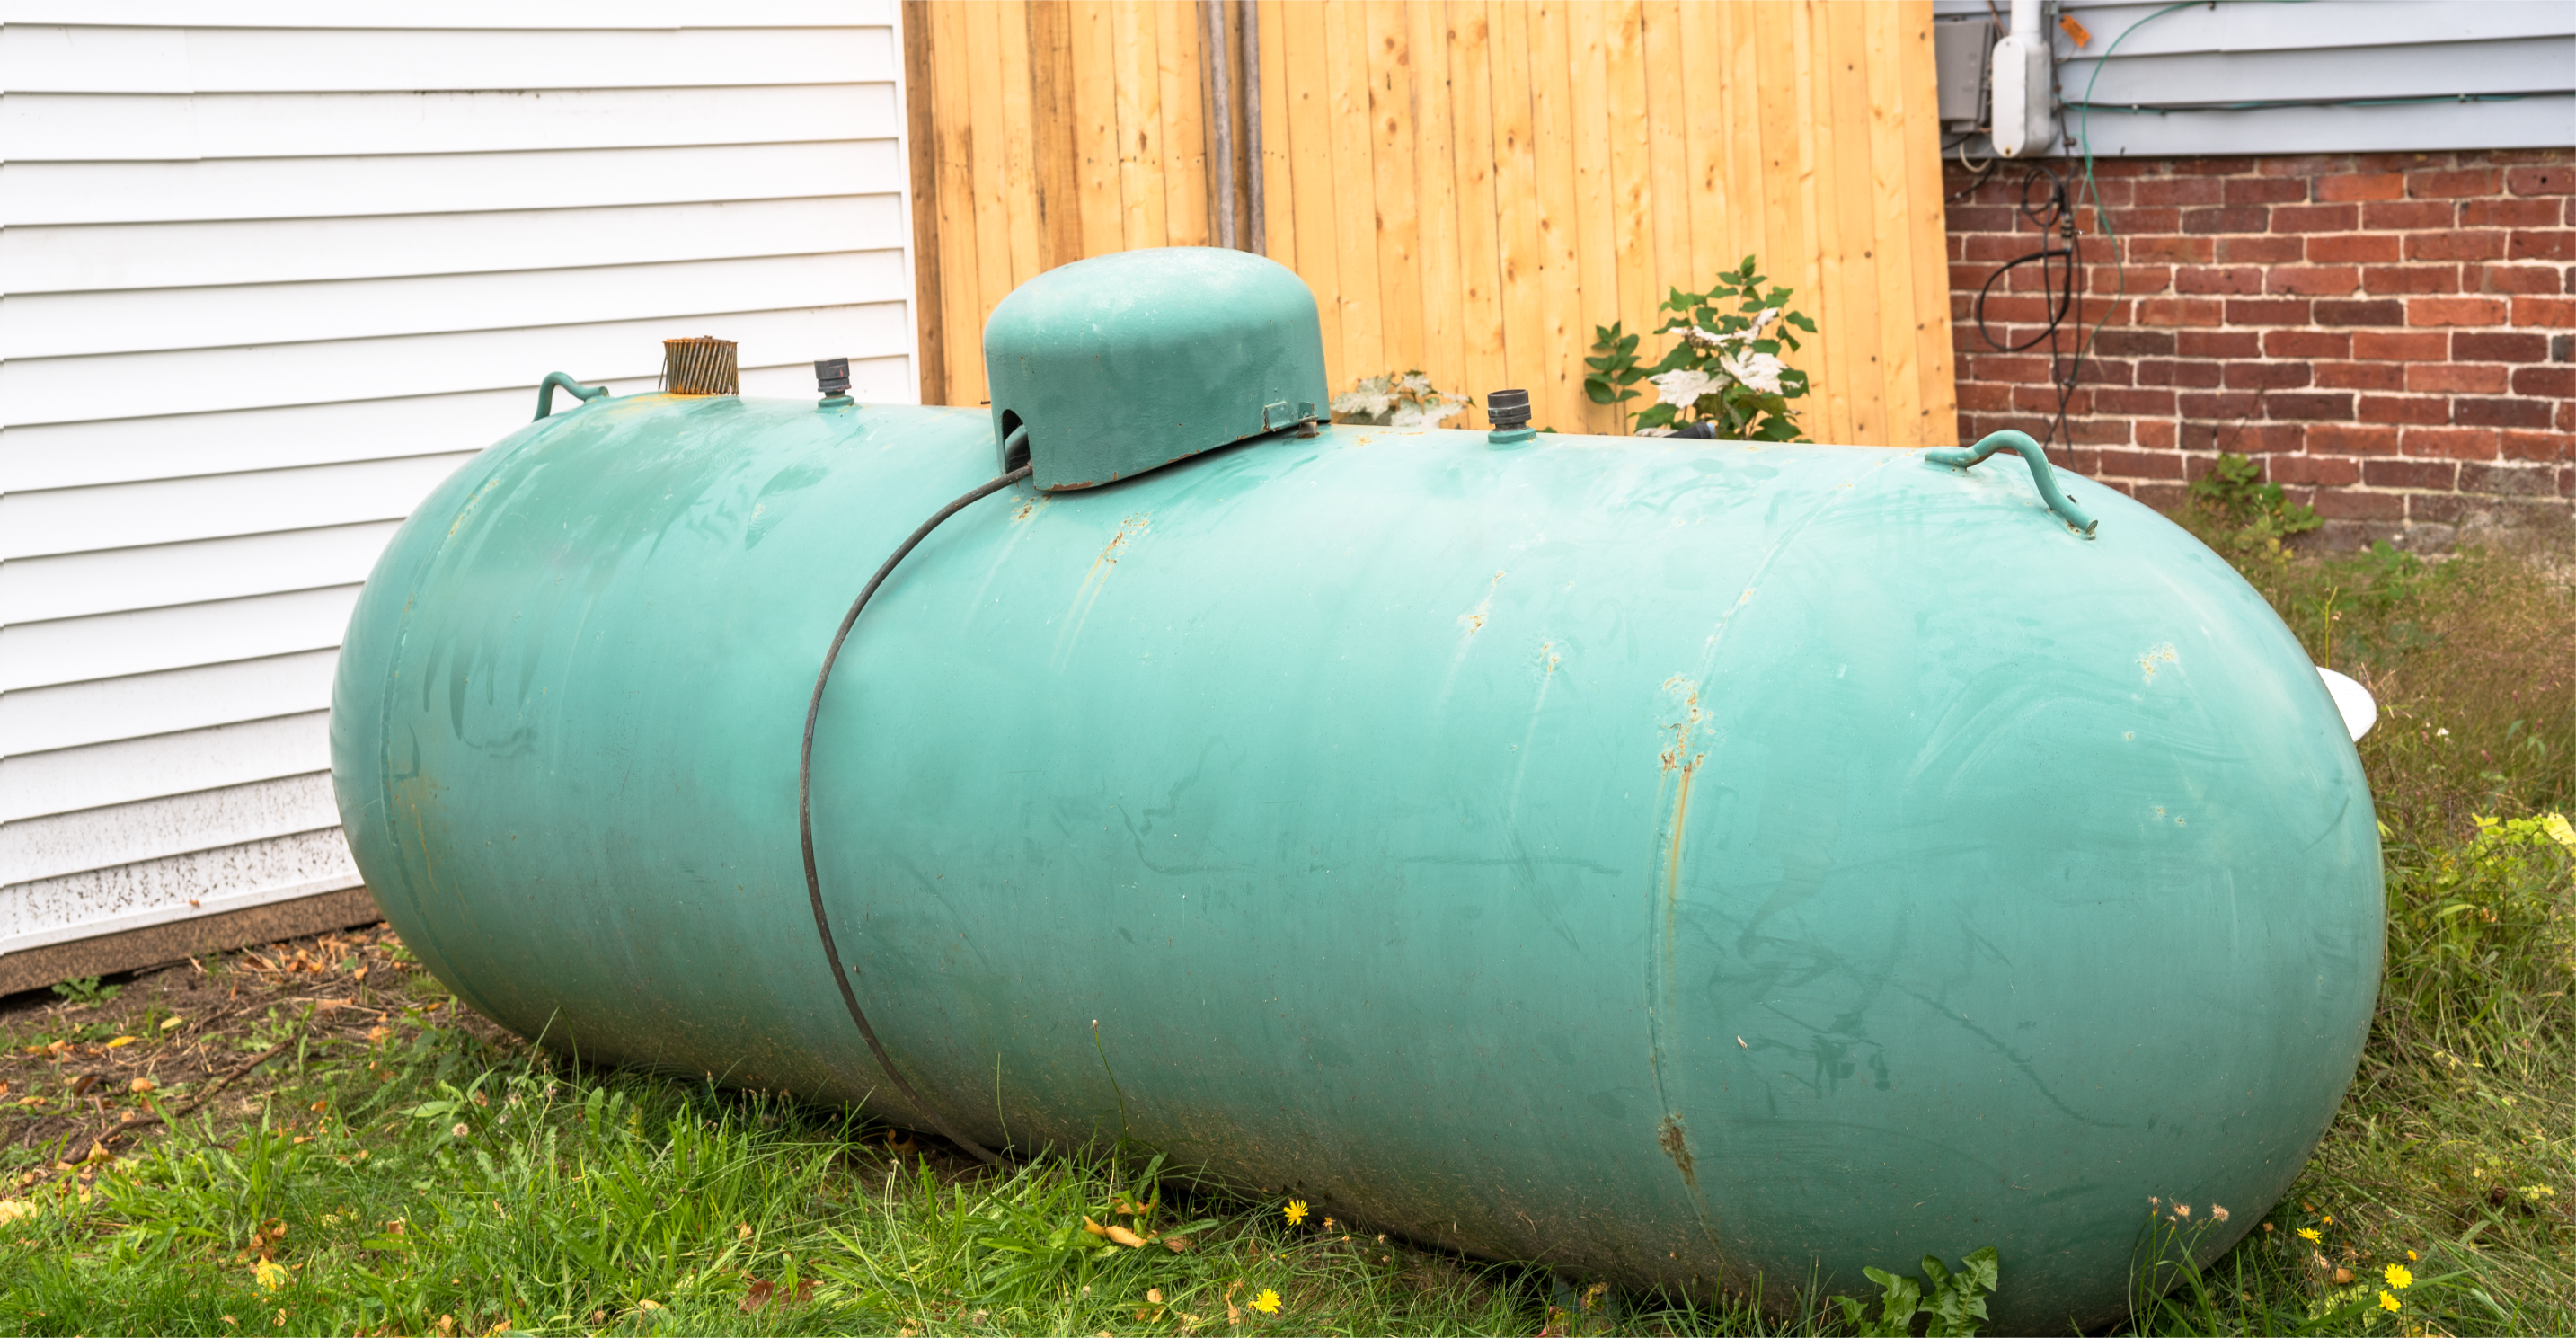 above ground propane tank by house